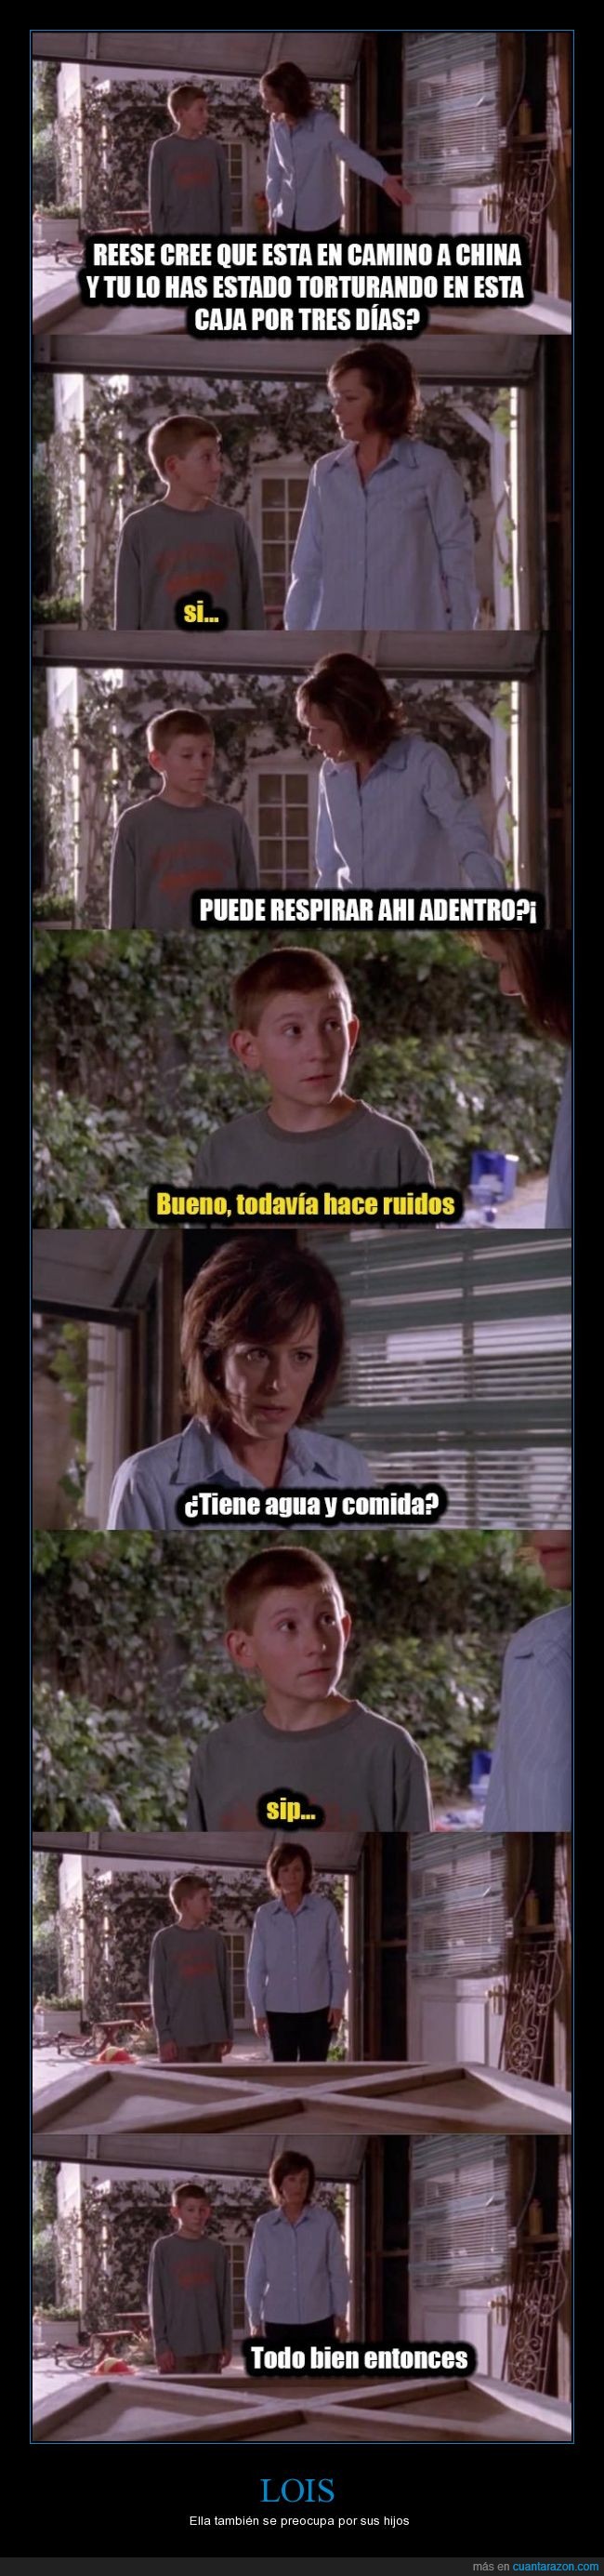 china,reese,caja,dewey,malcolm in the middle,enviar,Lois